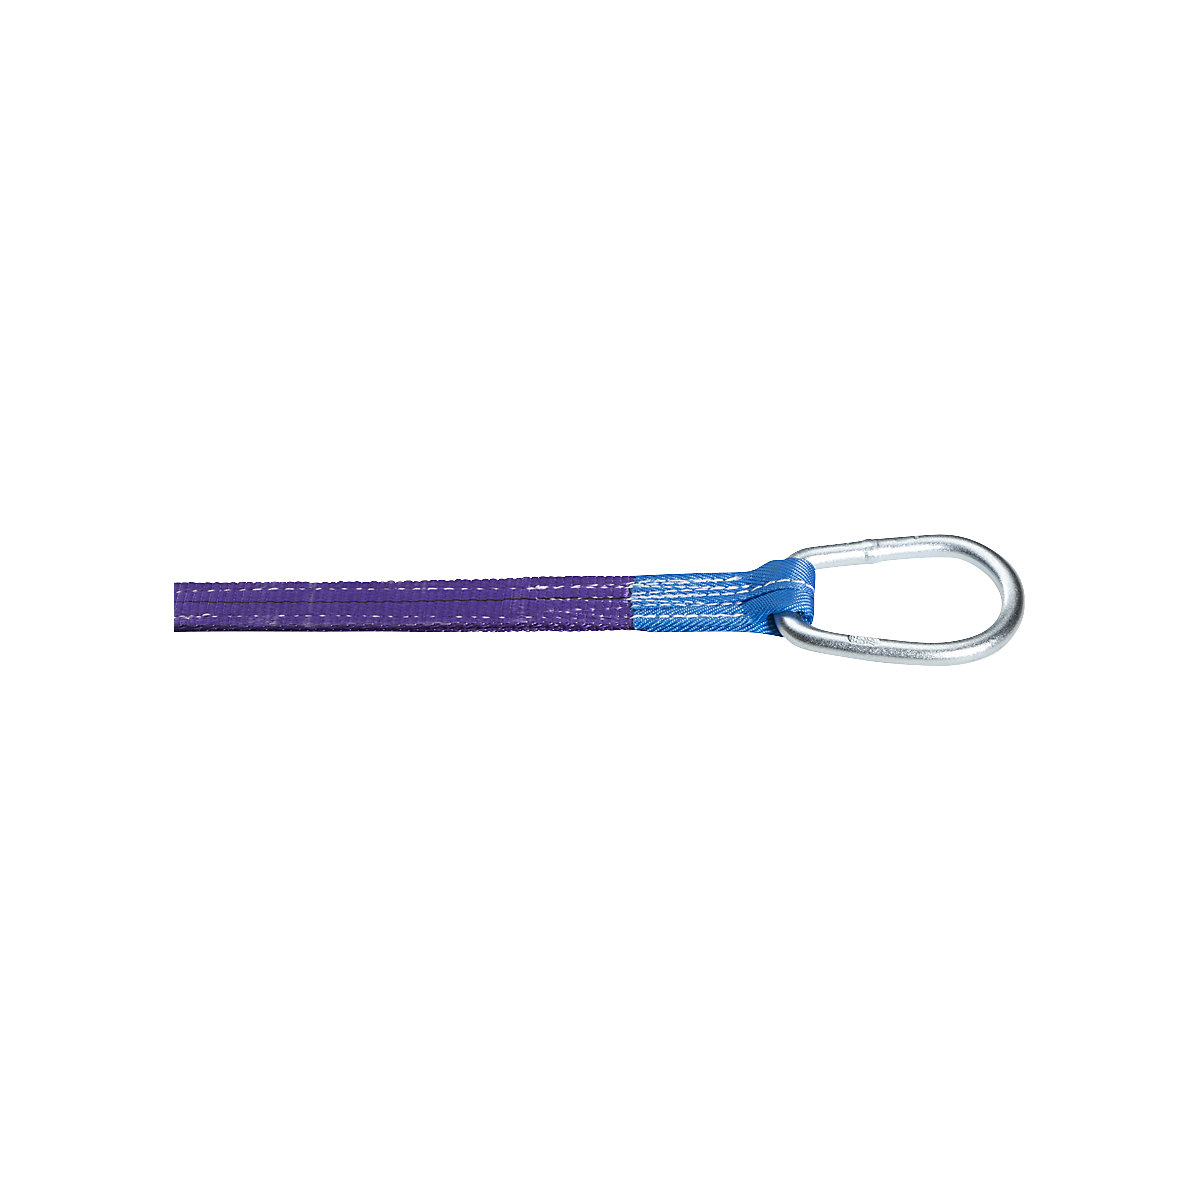 Lifting strap with 2 handles